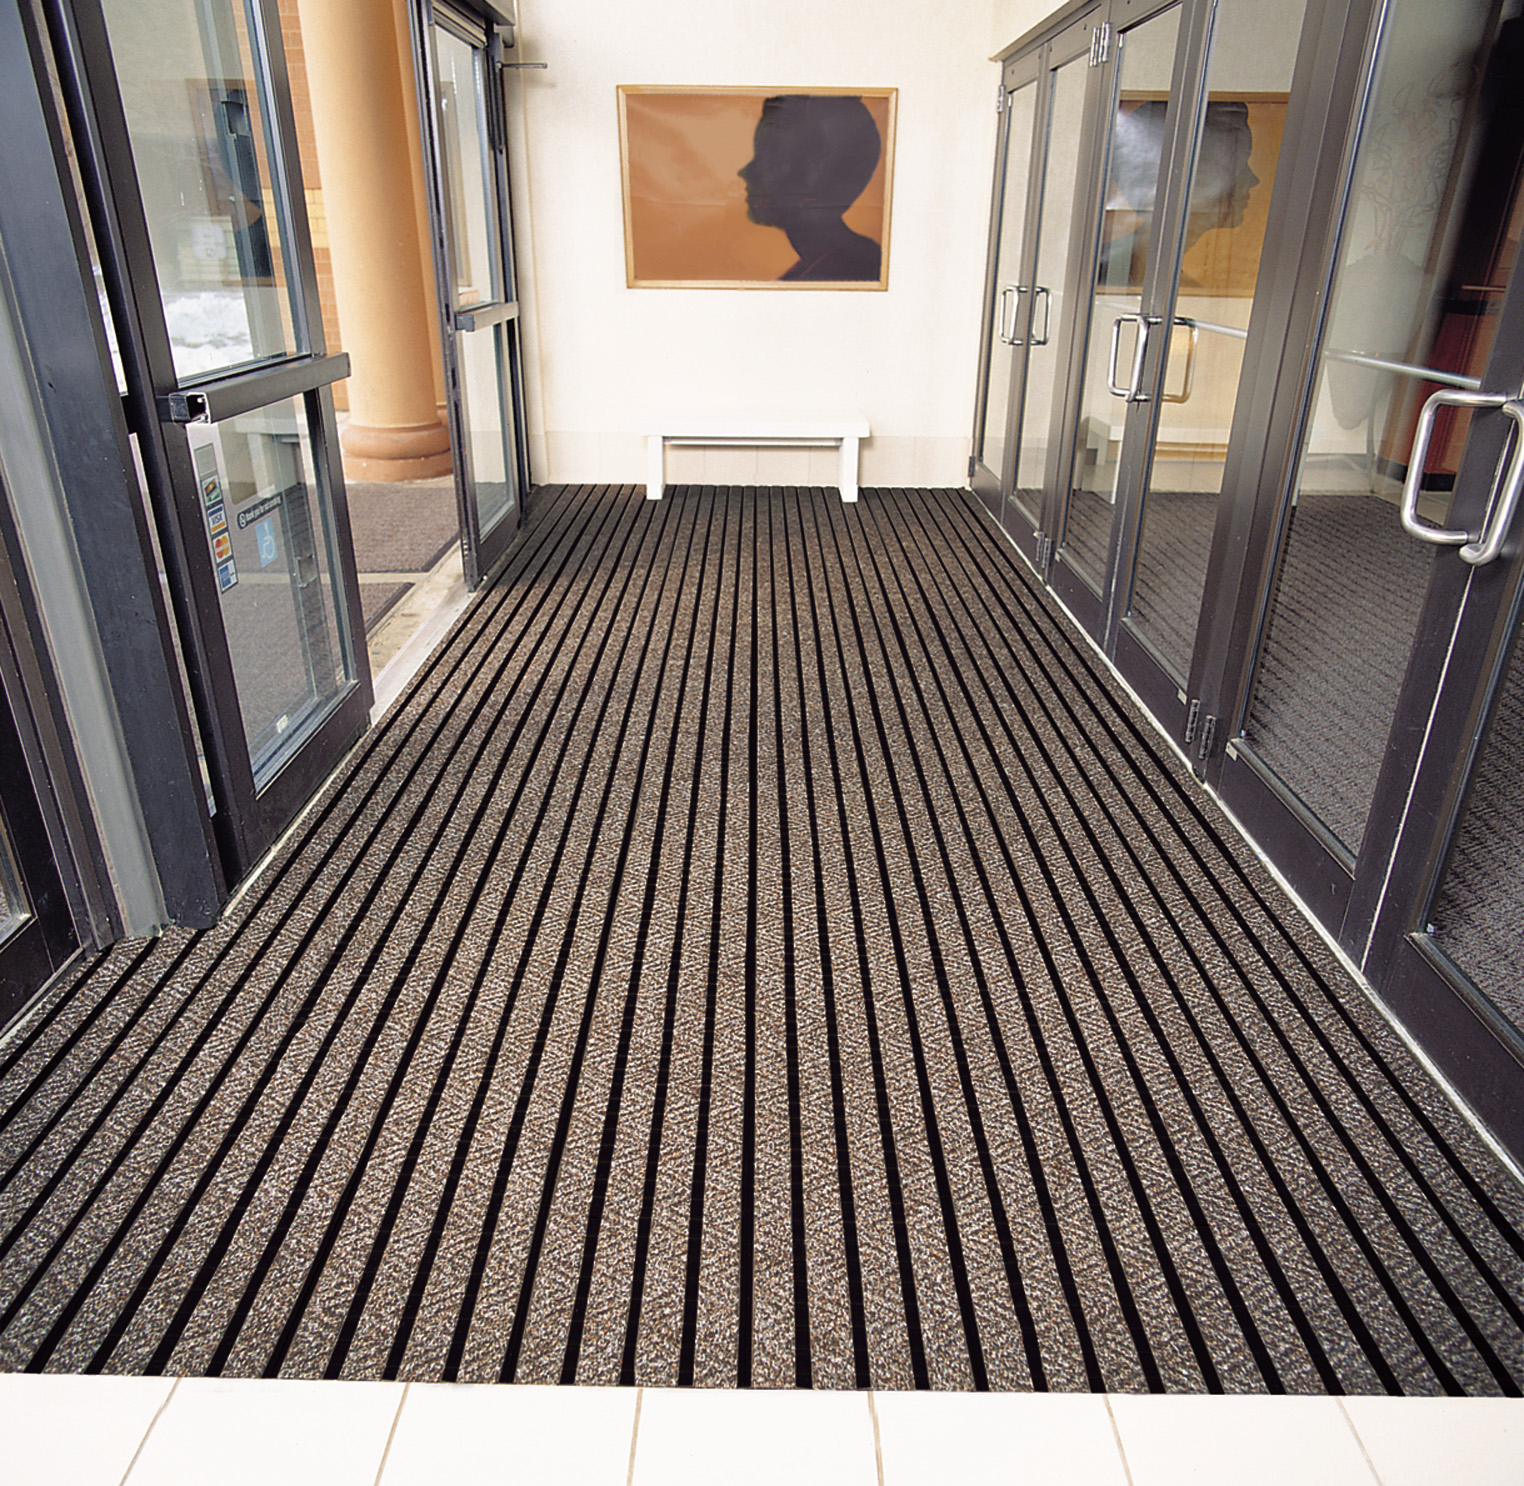 How to Choose the Best Entrance Floor Mats for Your Business